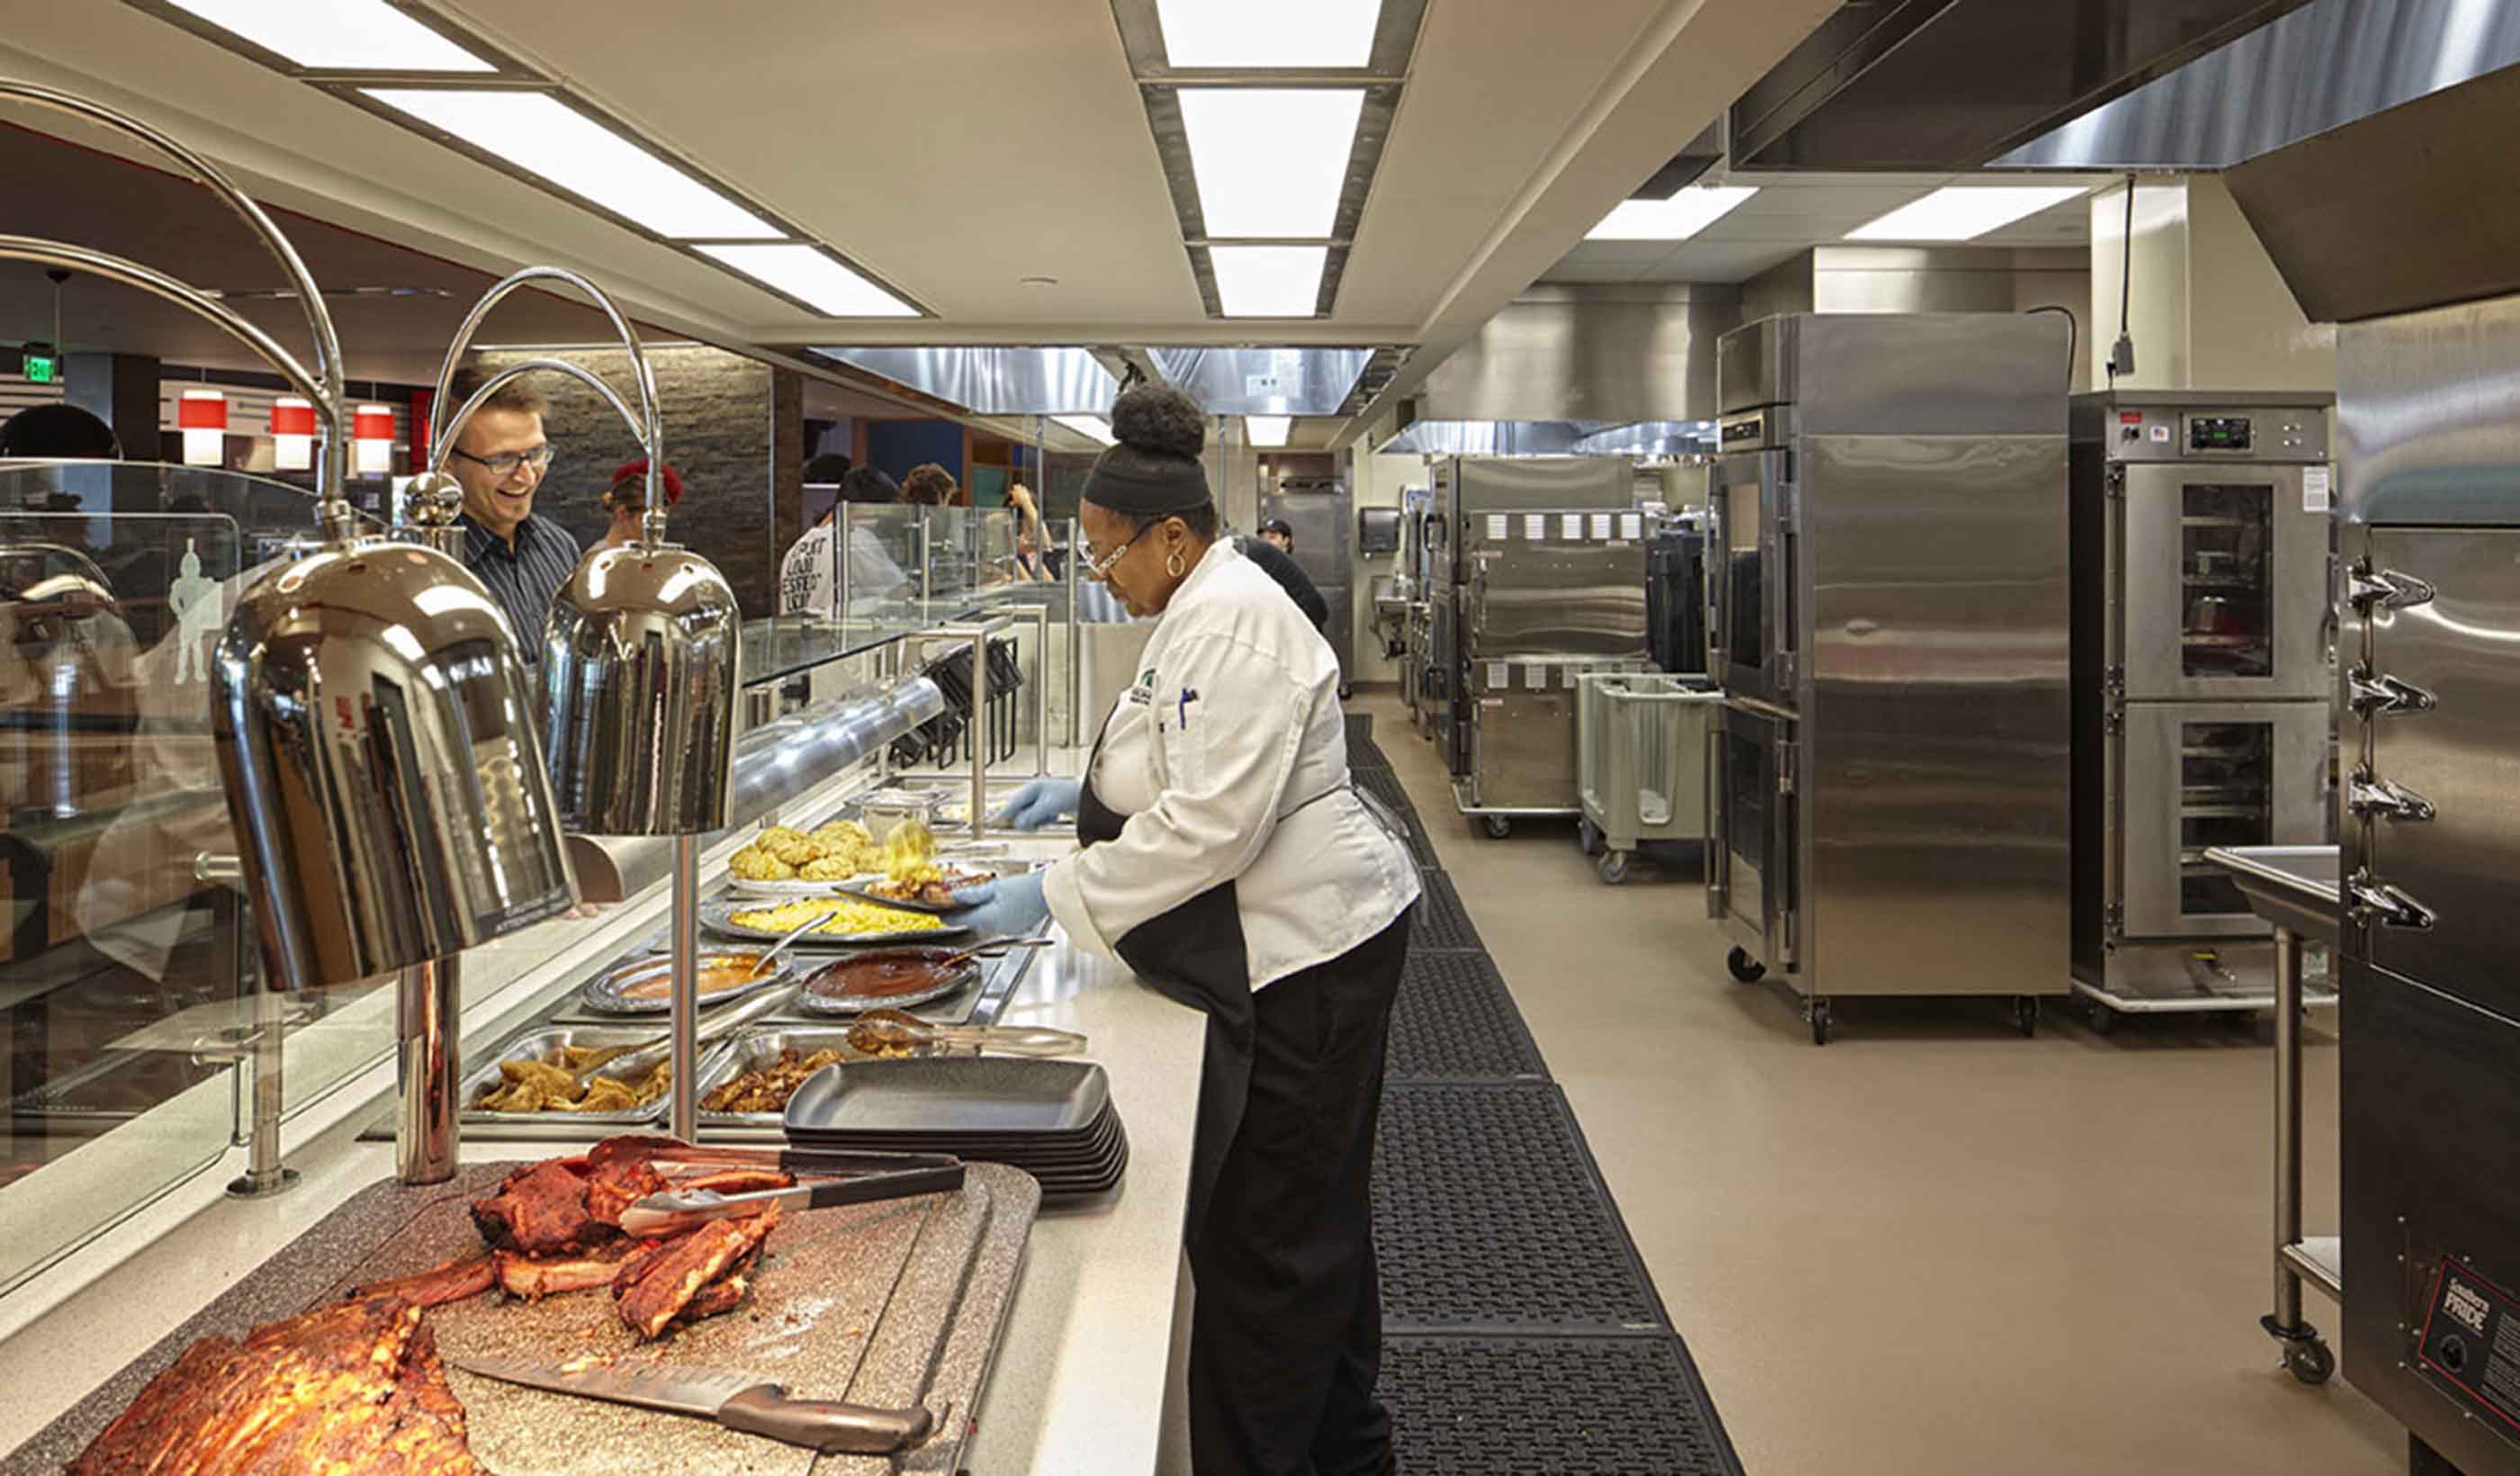 What’s cooking? When it comes to commercial kitchen design, it’s all about ventilation